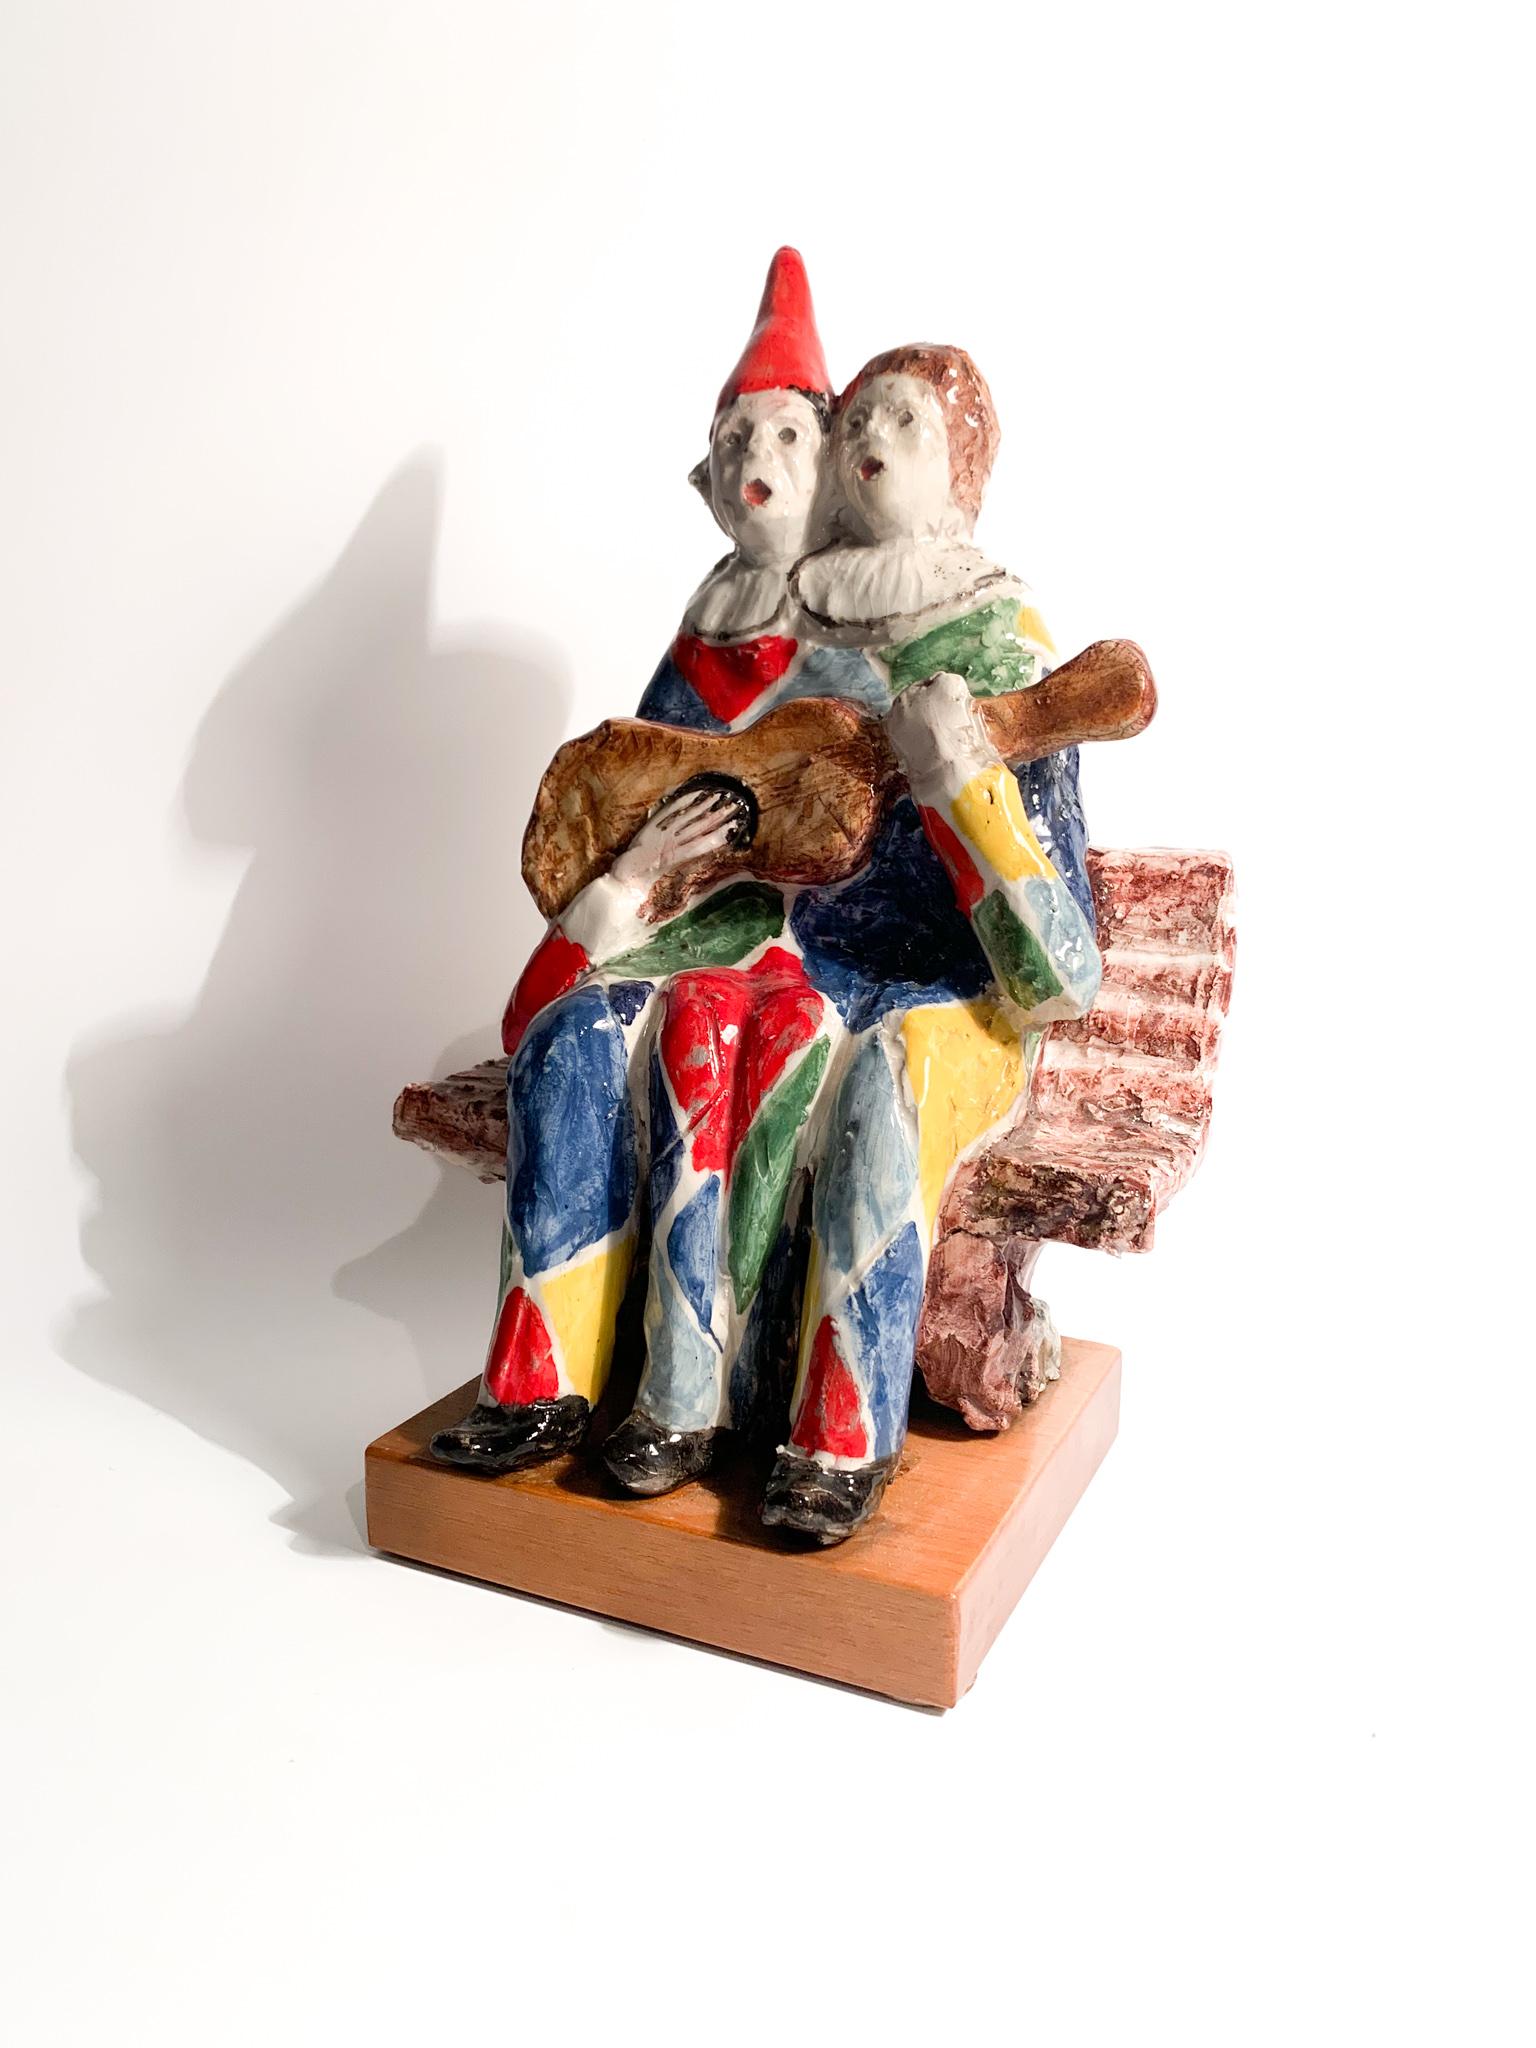 Ceramic figurine depicting a couple of musicians, created by Walter Pozzi in the 1980s

Ø 17 cm Ø 13 cm h 30 cm